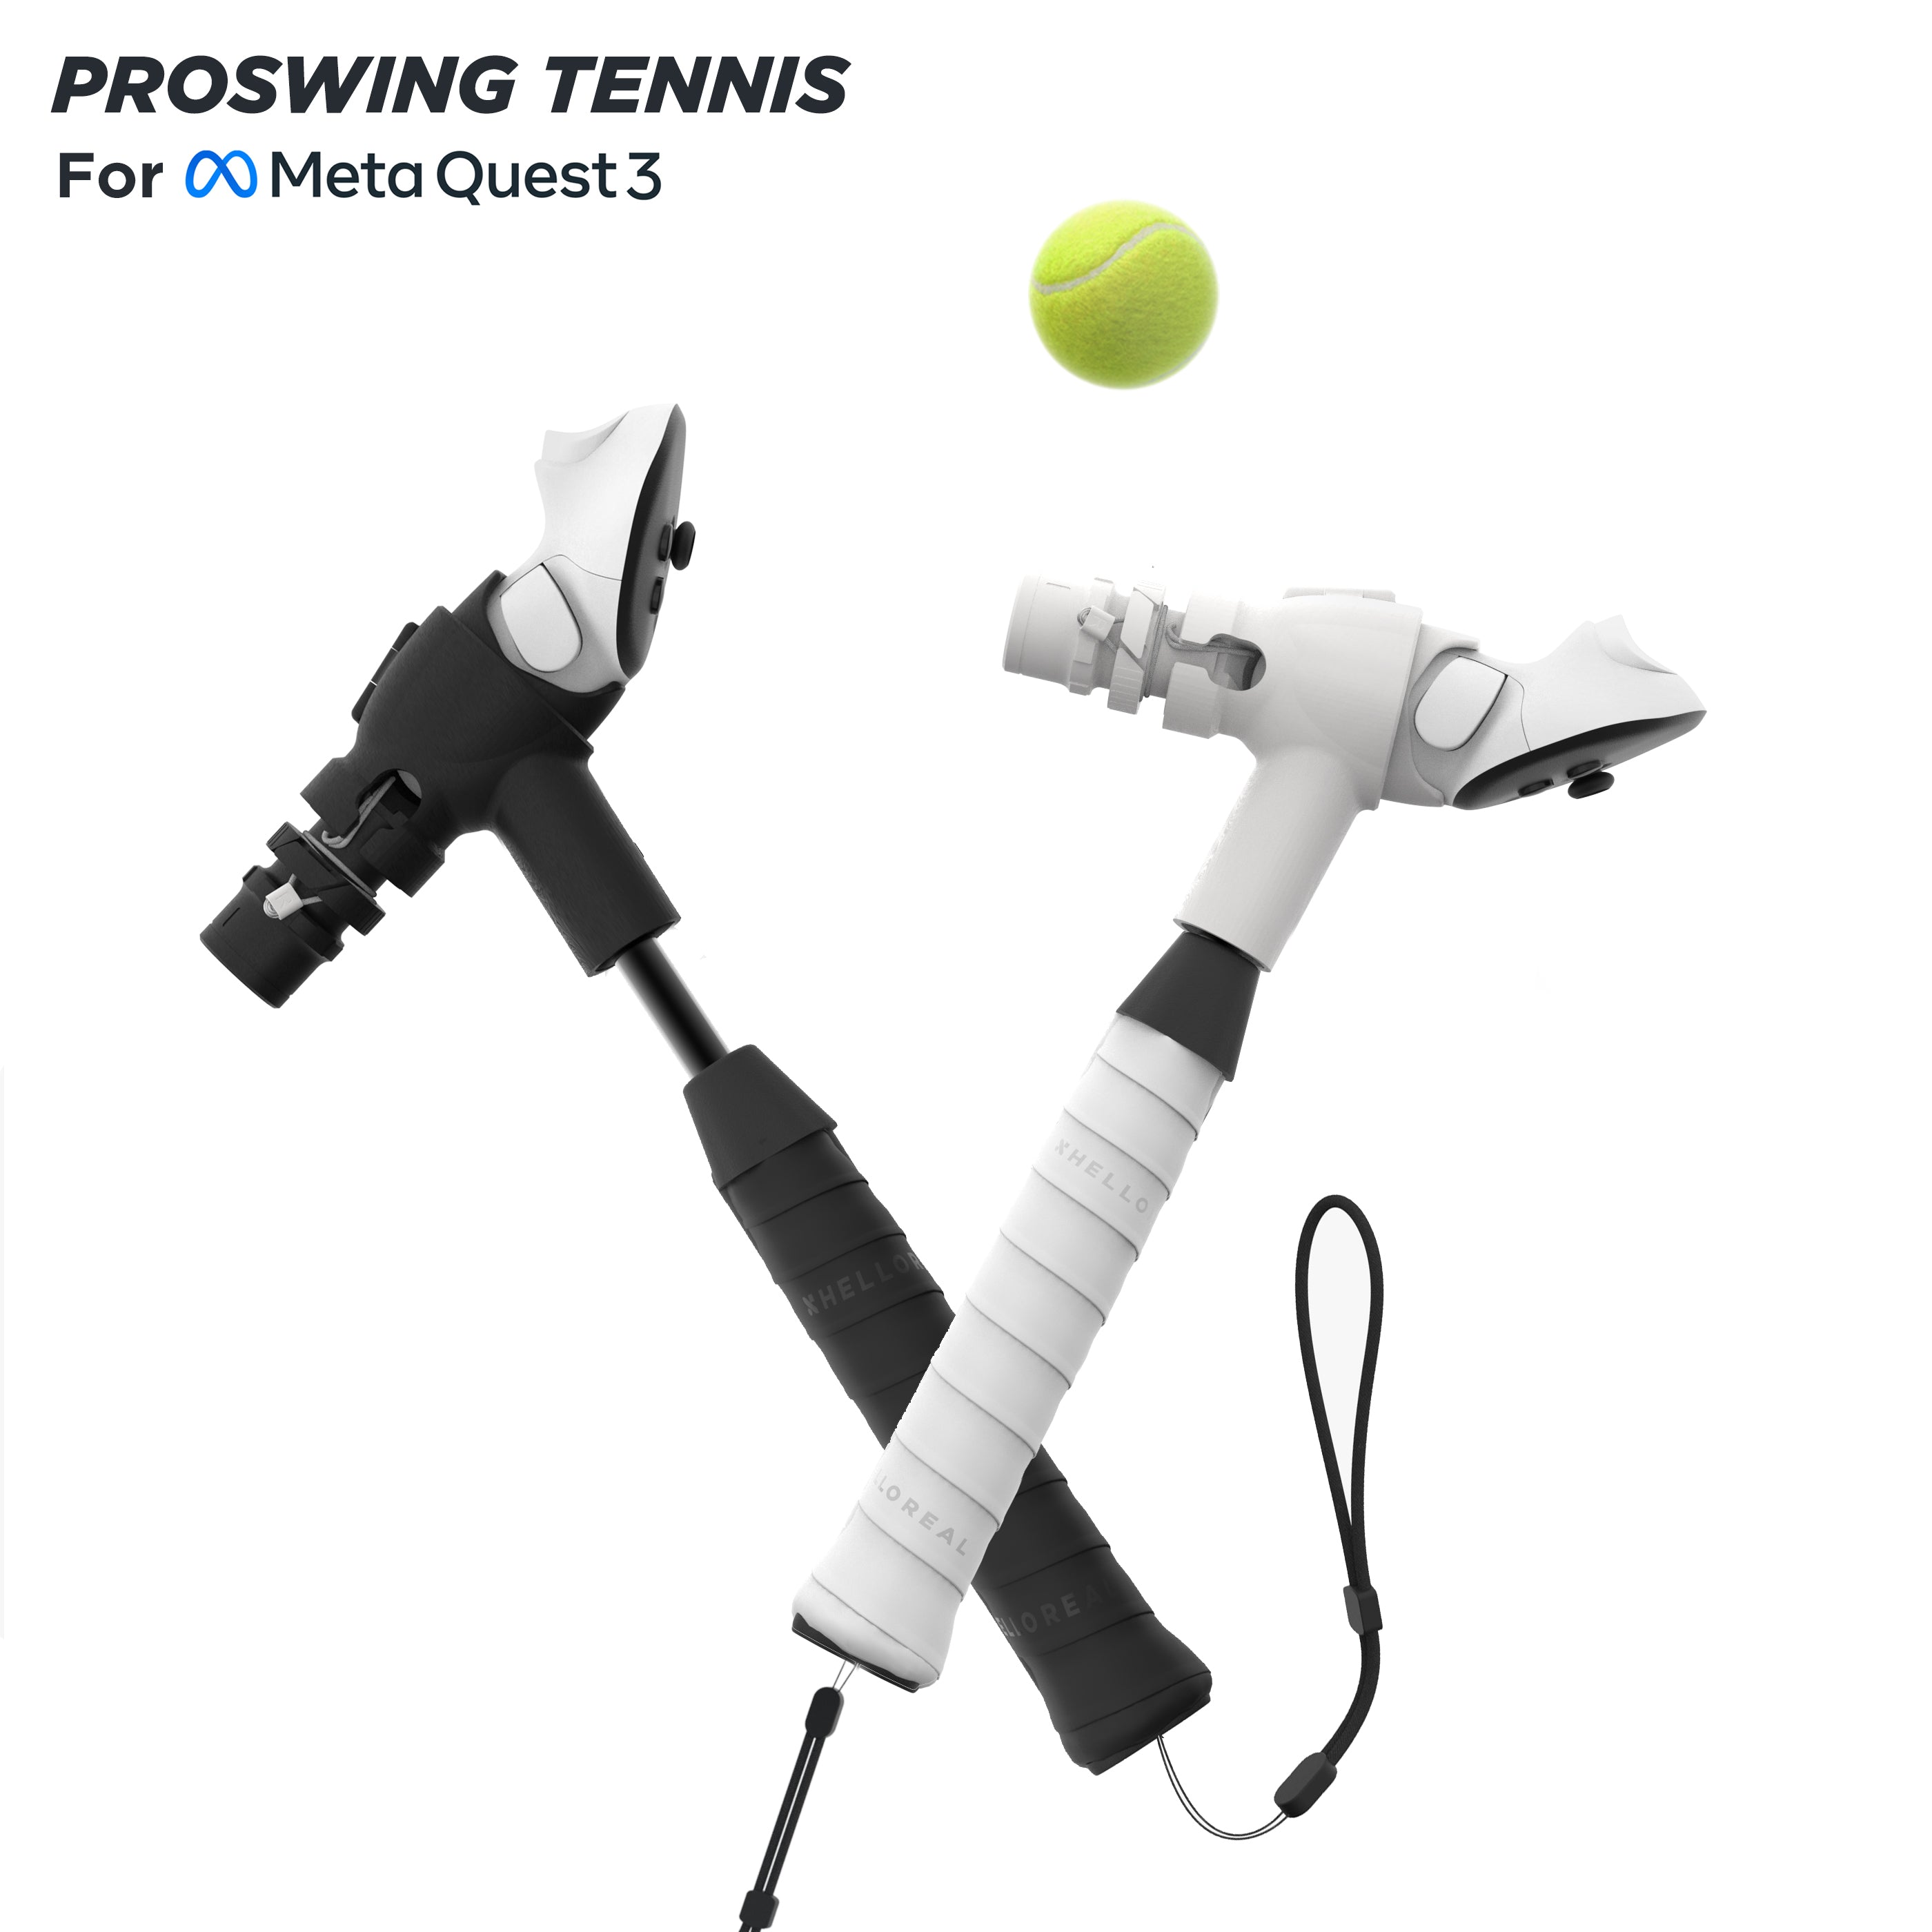 ProSwing Tennis racket / Meta Quest 2, Pro and Quest 3 – HelloReal